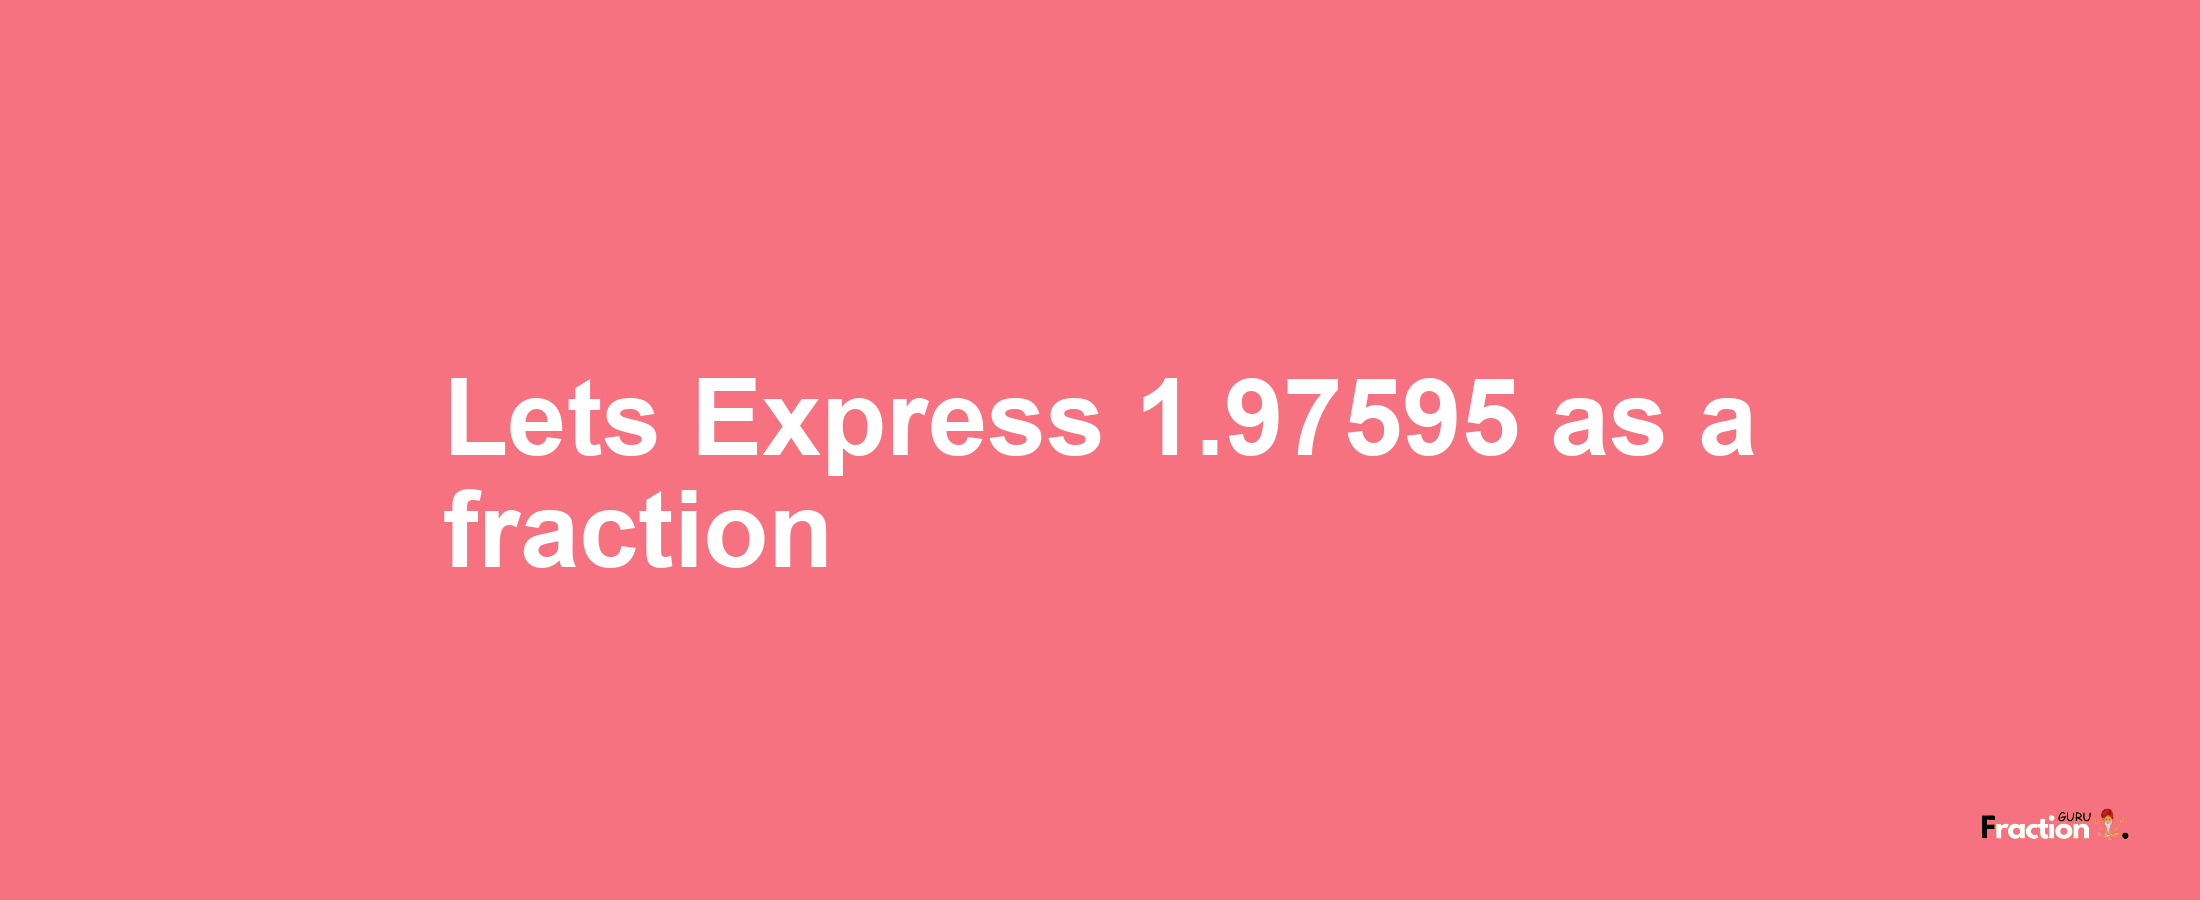 Lets Express 1.97595 as afraction